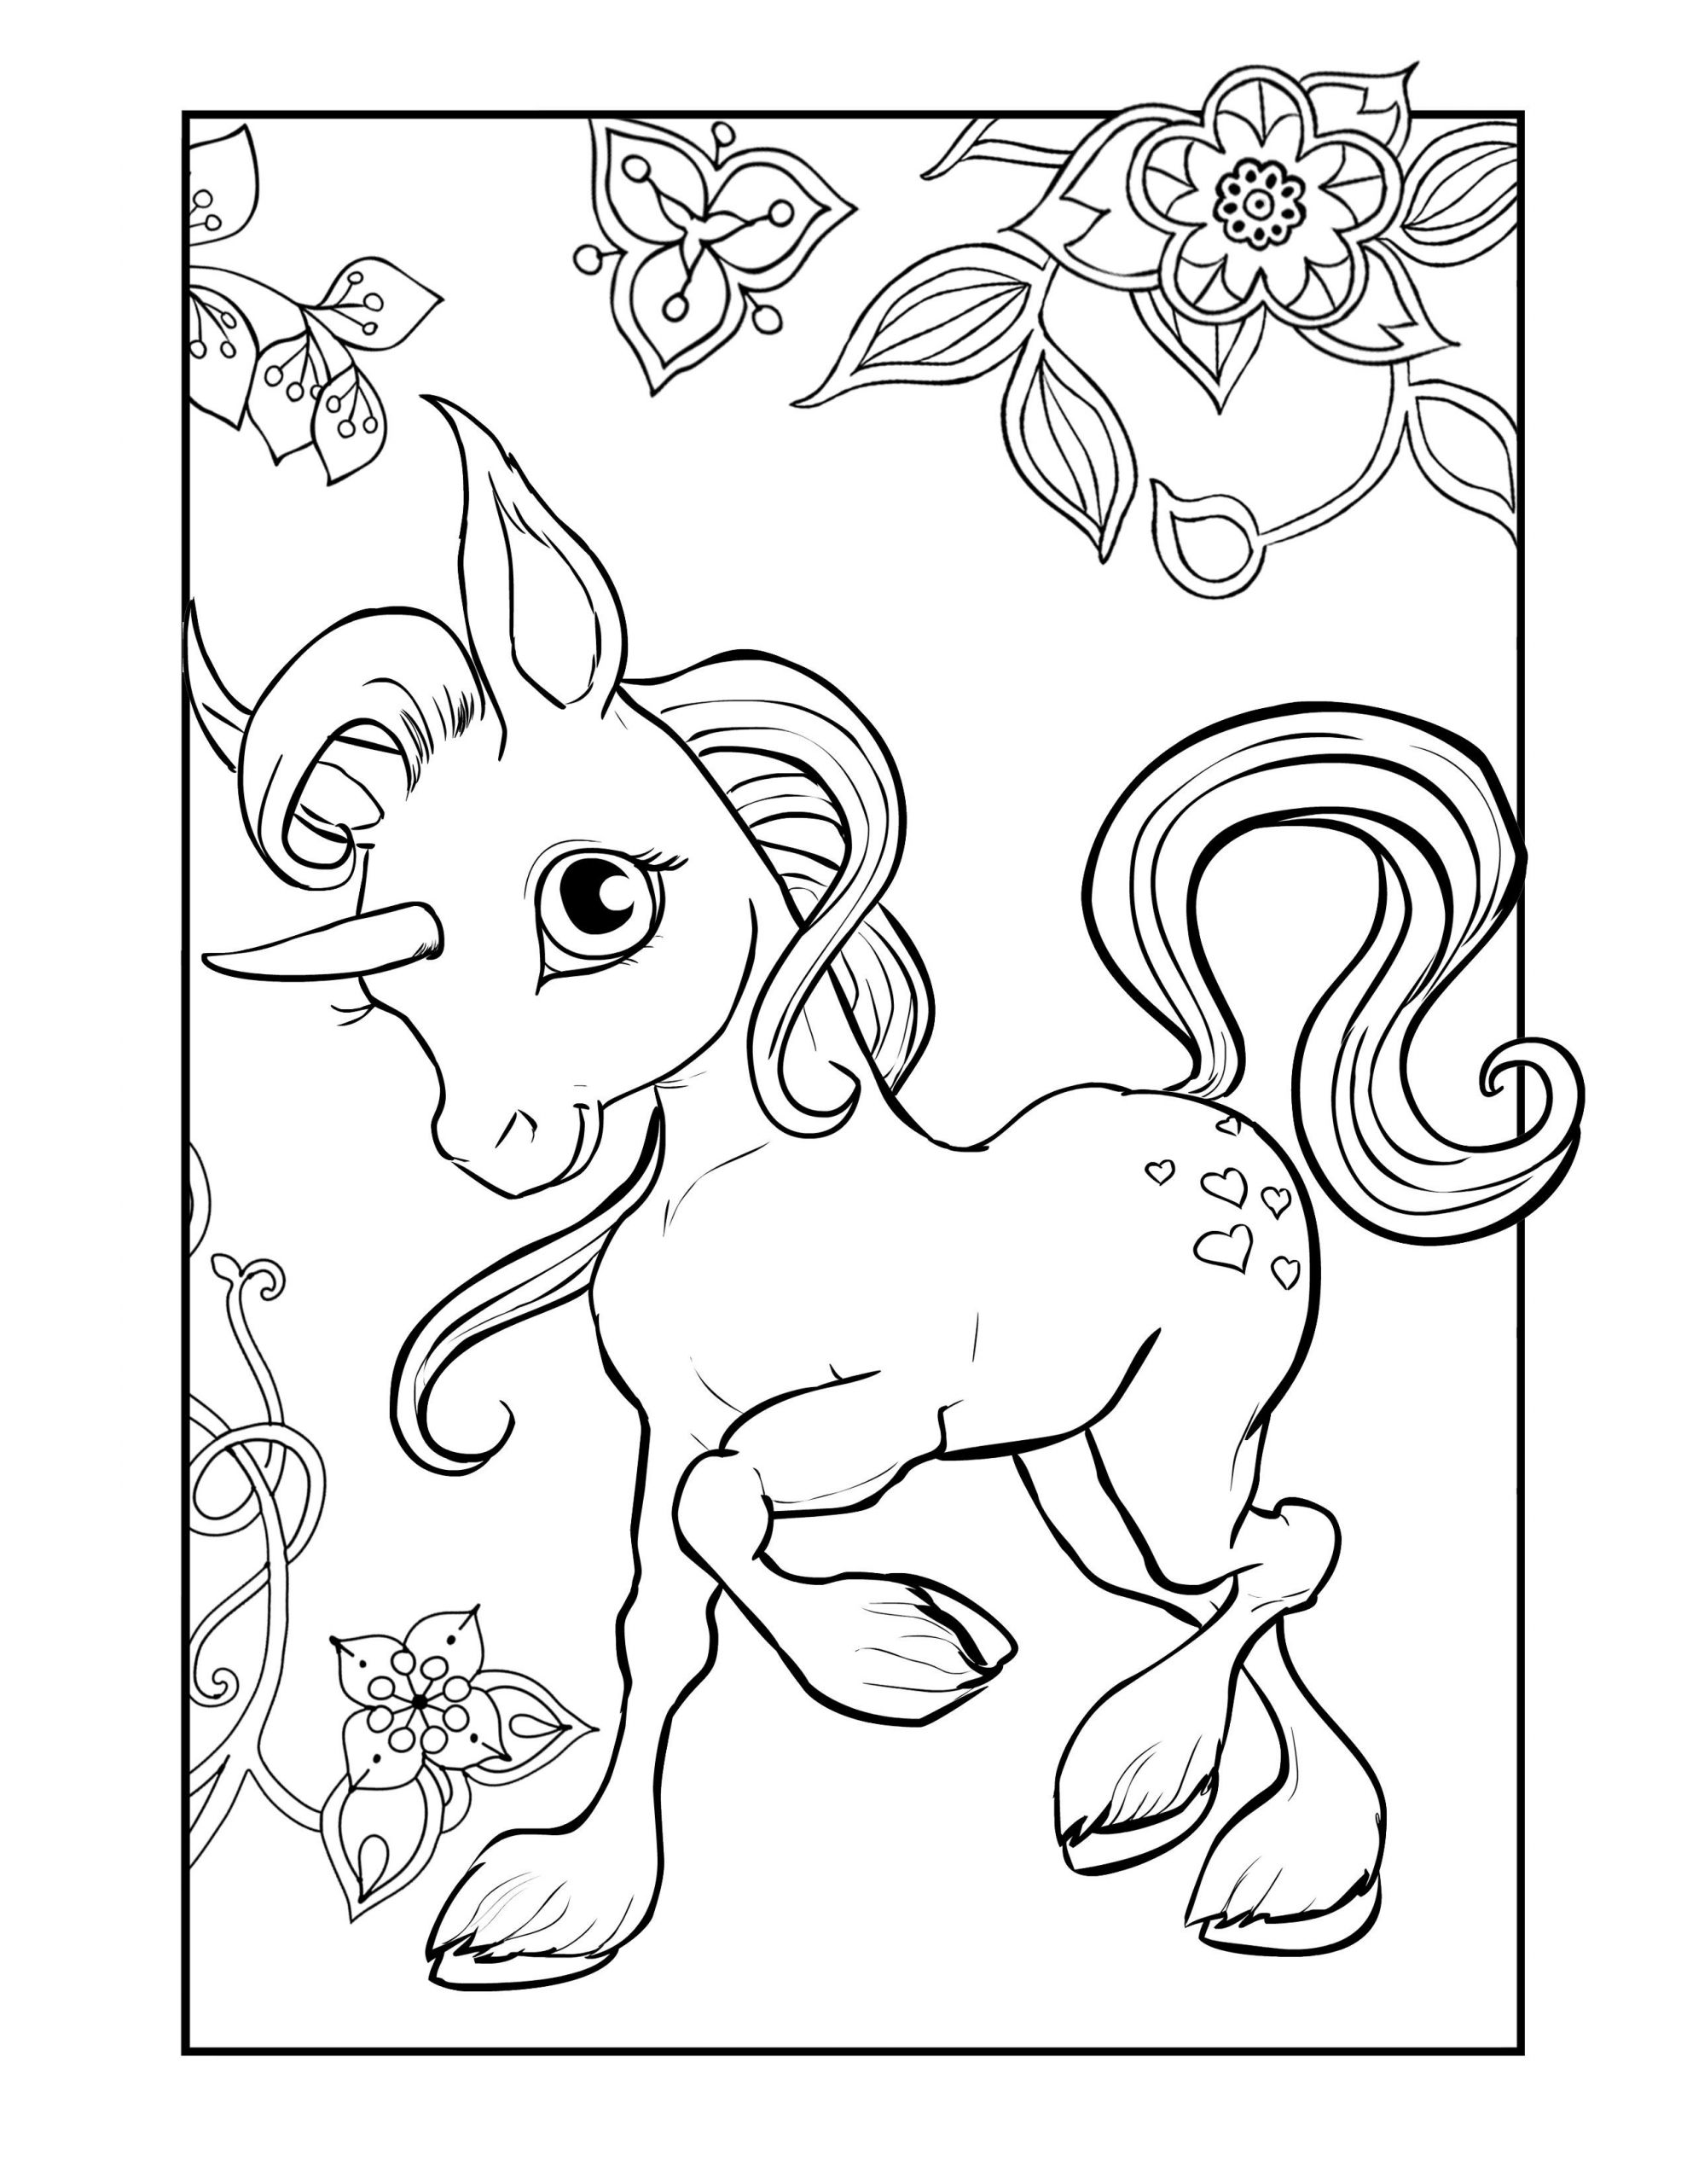 Unicorn Coloring Pages For Girls
 Pin on Horse Lovers Coloring Books